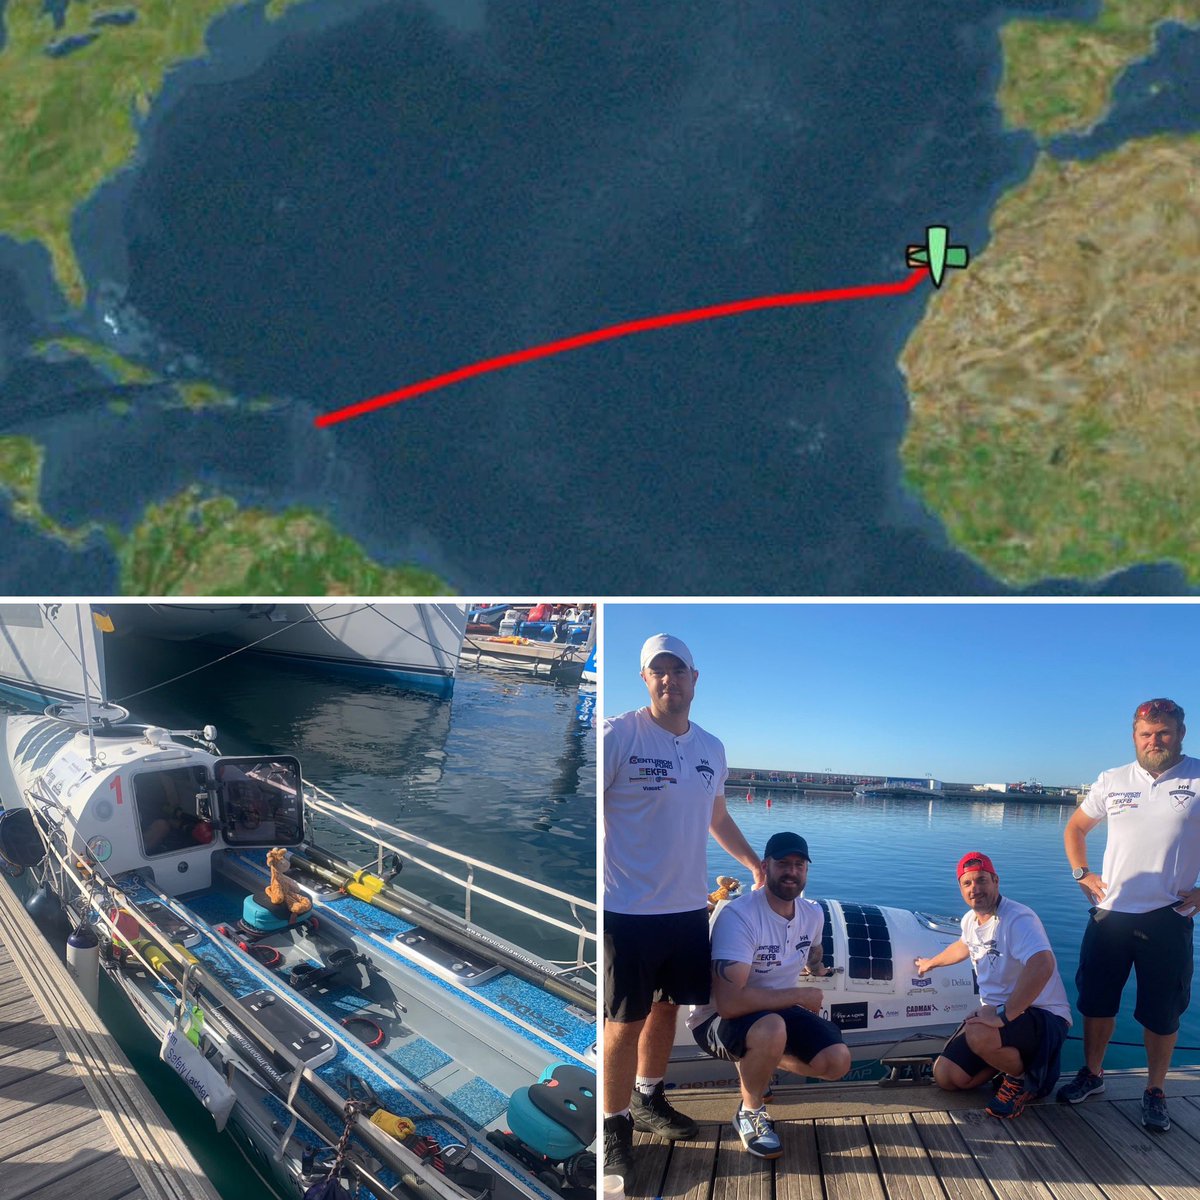 Good luck to the RAF Regiment @atlantic_rocks1 who are setting off as we speak on their transatlantic row in support of 5 fantastic charities. This is a tremendous 3000 mile effort requiring endurance, teamwork and resilience. Please support the crew: justgiving.com/crowdfunding/a…